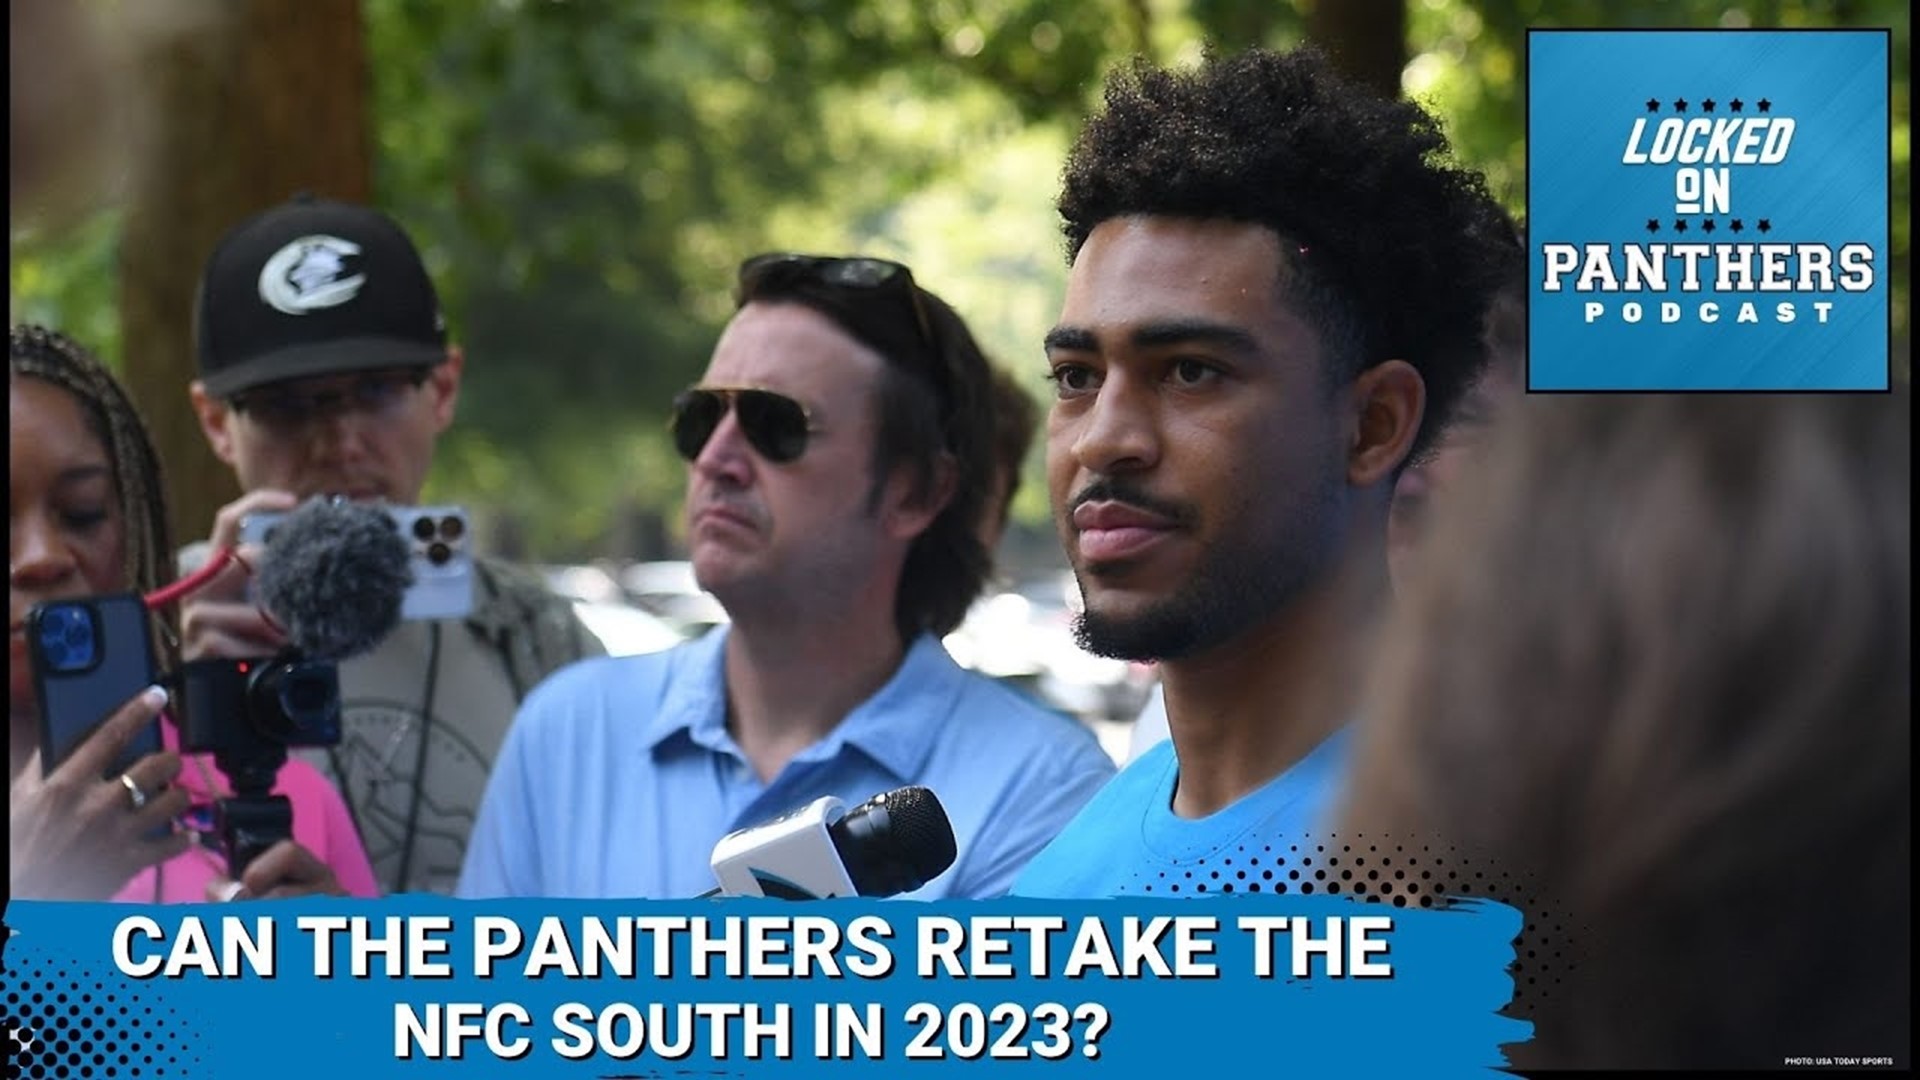 Can The Carolina Panthers Take Control of the NFC South?